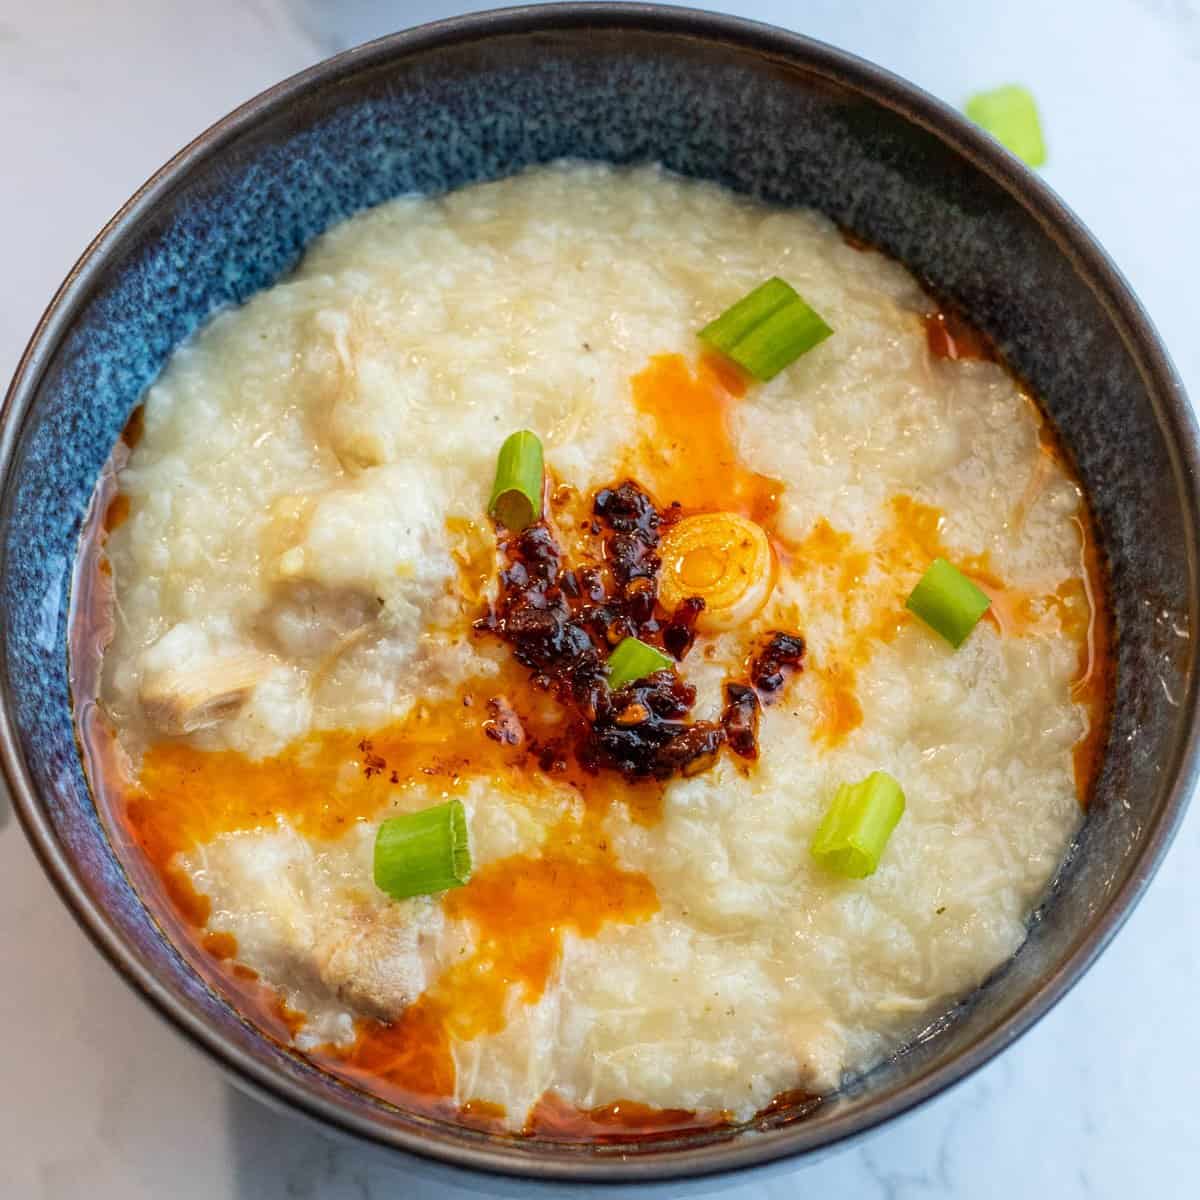 chicken congee served in a bowl with green onions and chili oil on top